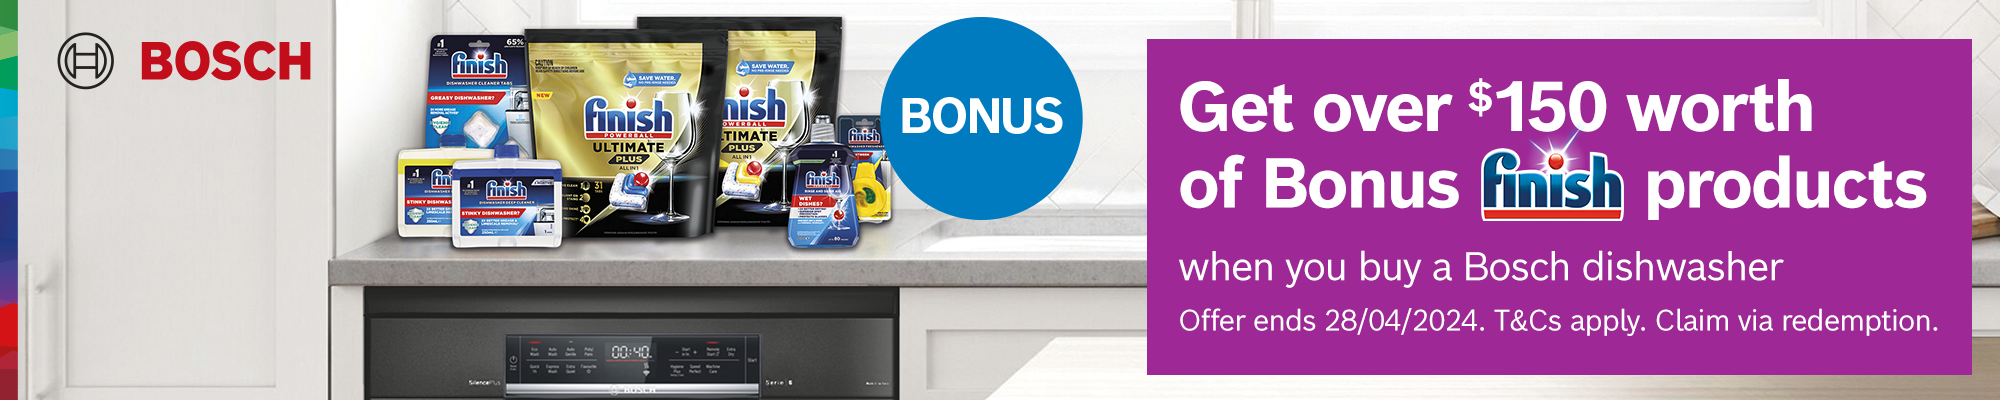 Get Over $150 Worth Of Bonus Finish Products When Purchasing A Bosch Dishwasher*